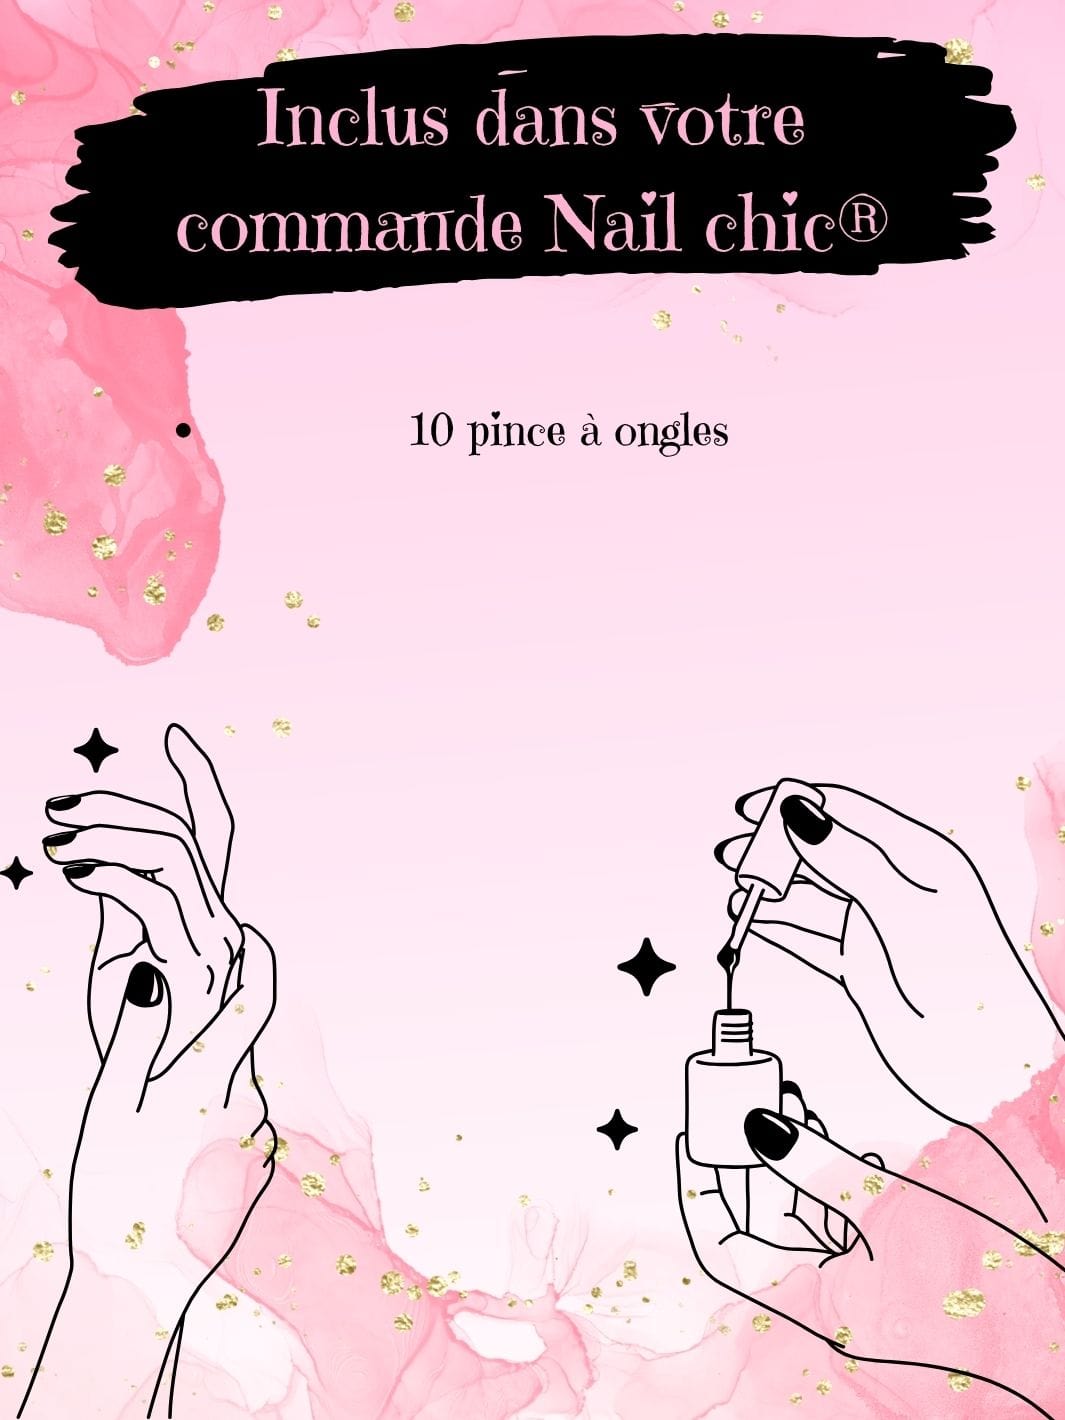 Meilleur pince a ongle Nail Chic